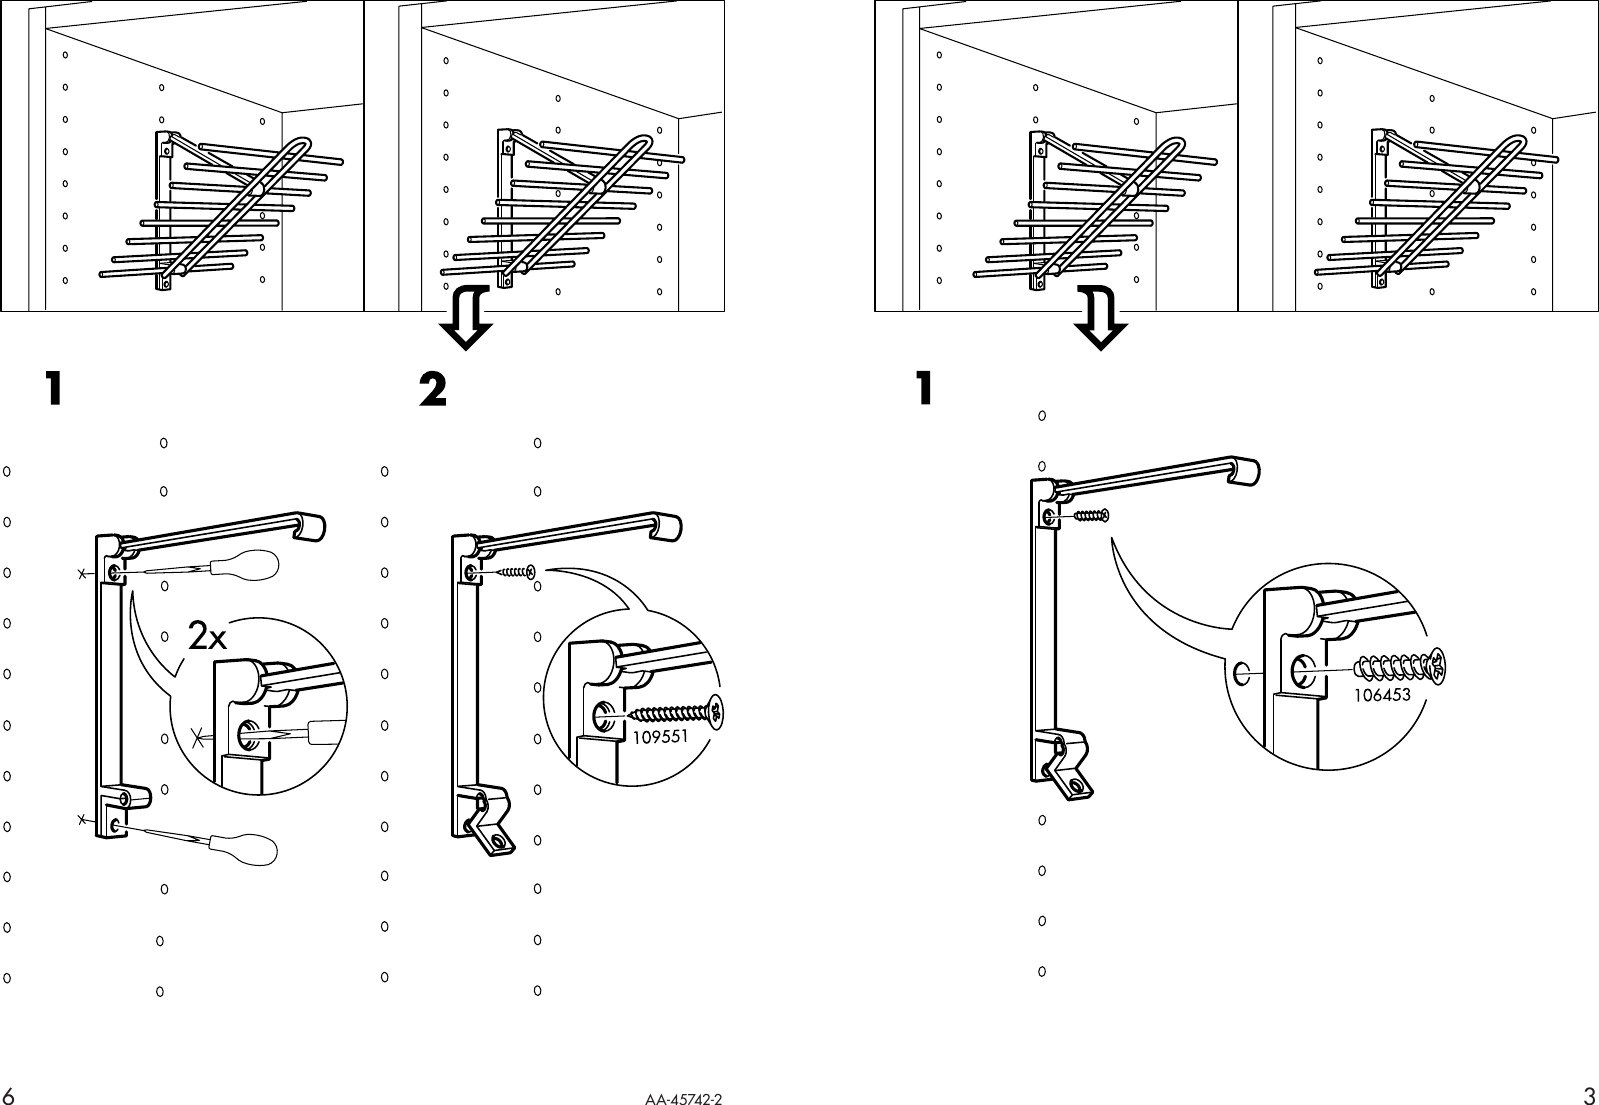 Page 3 of 4 - Ikea Ikea-Komplement-Tie-Rack-Assembly-Instruction-7  Ikea-komplement-tie-rack-assembly-instruction